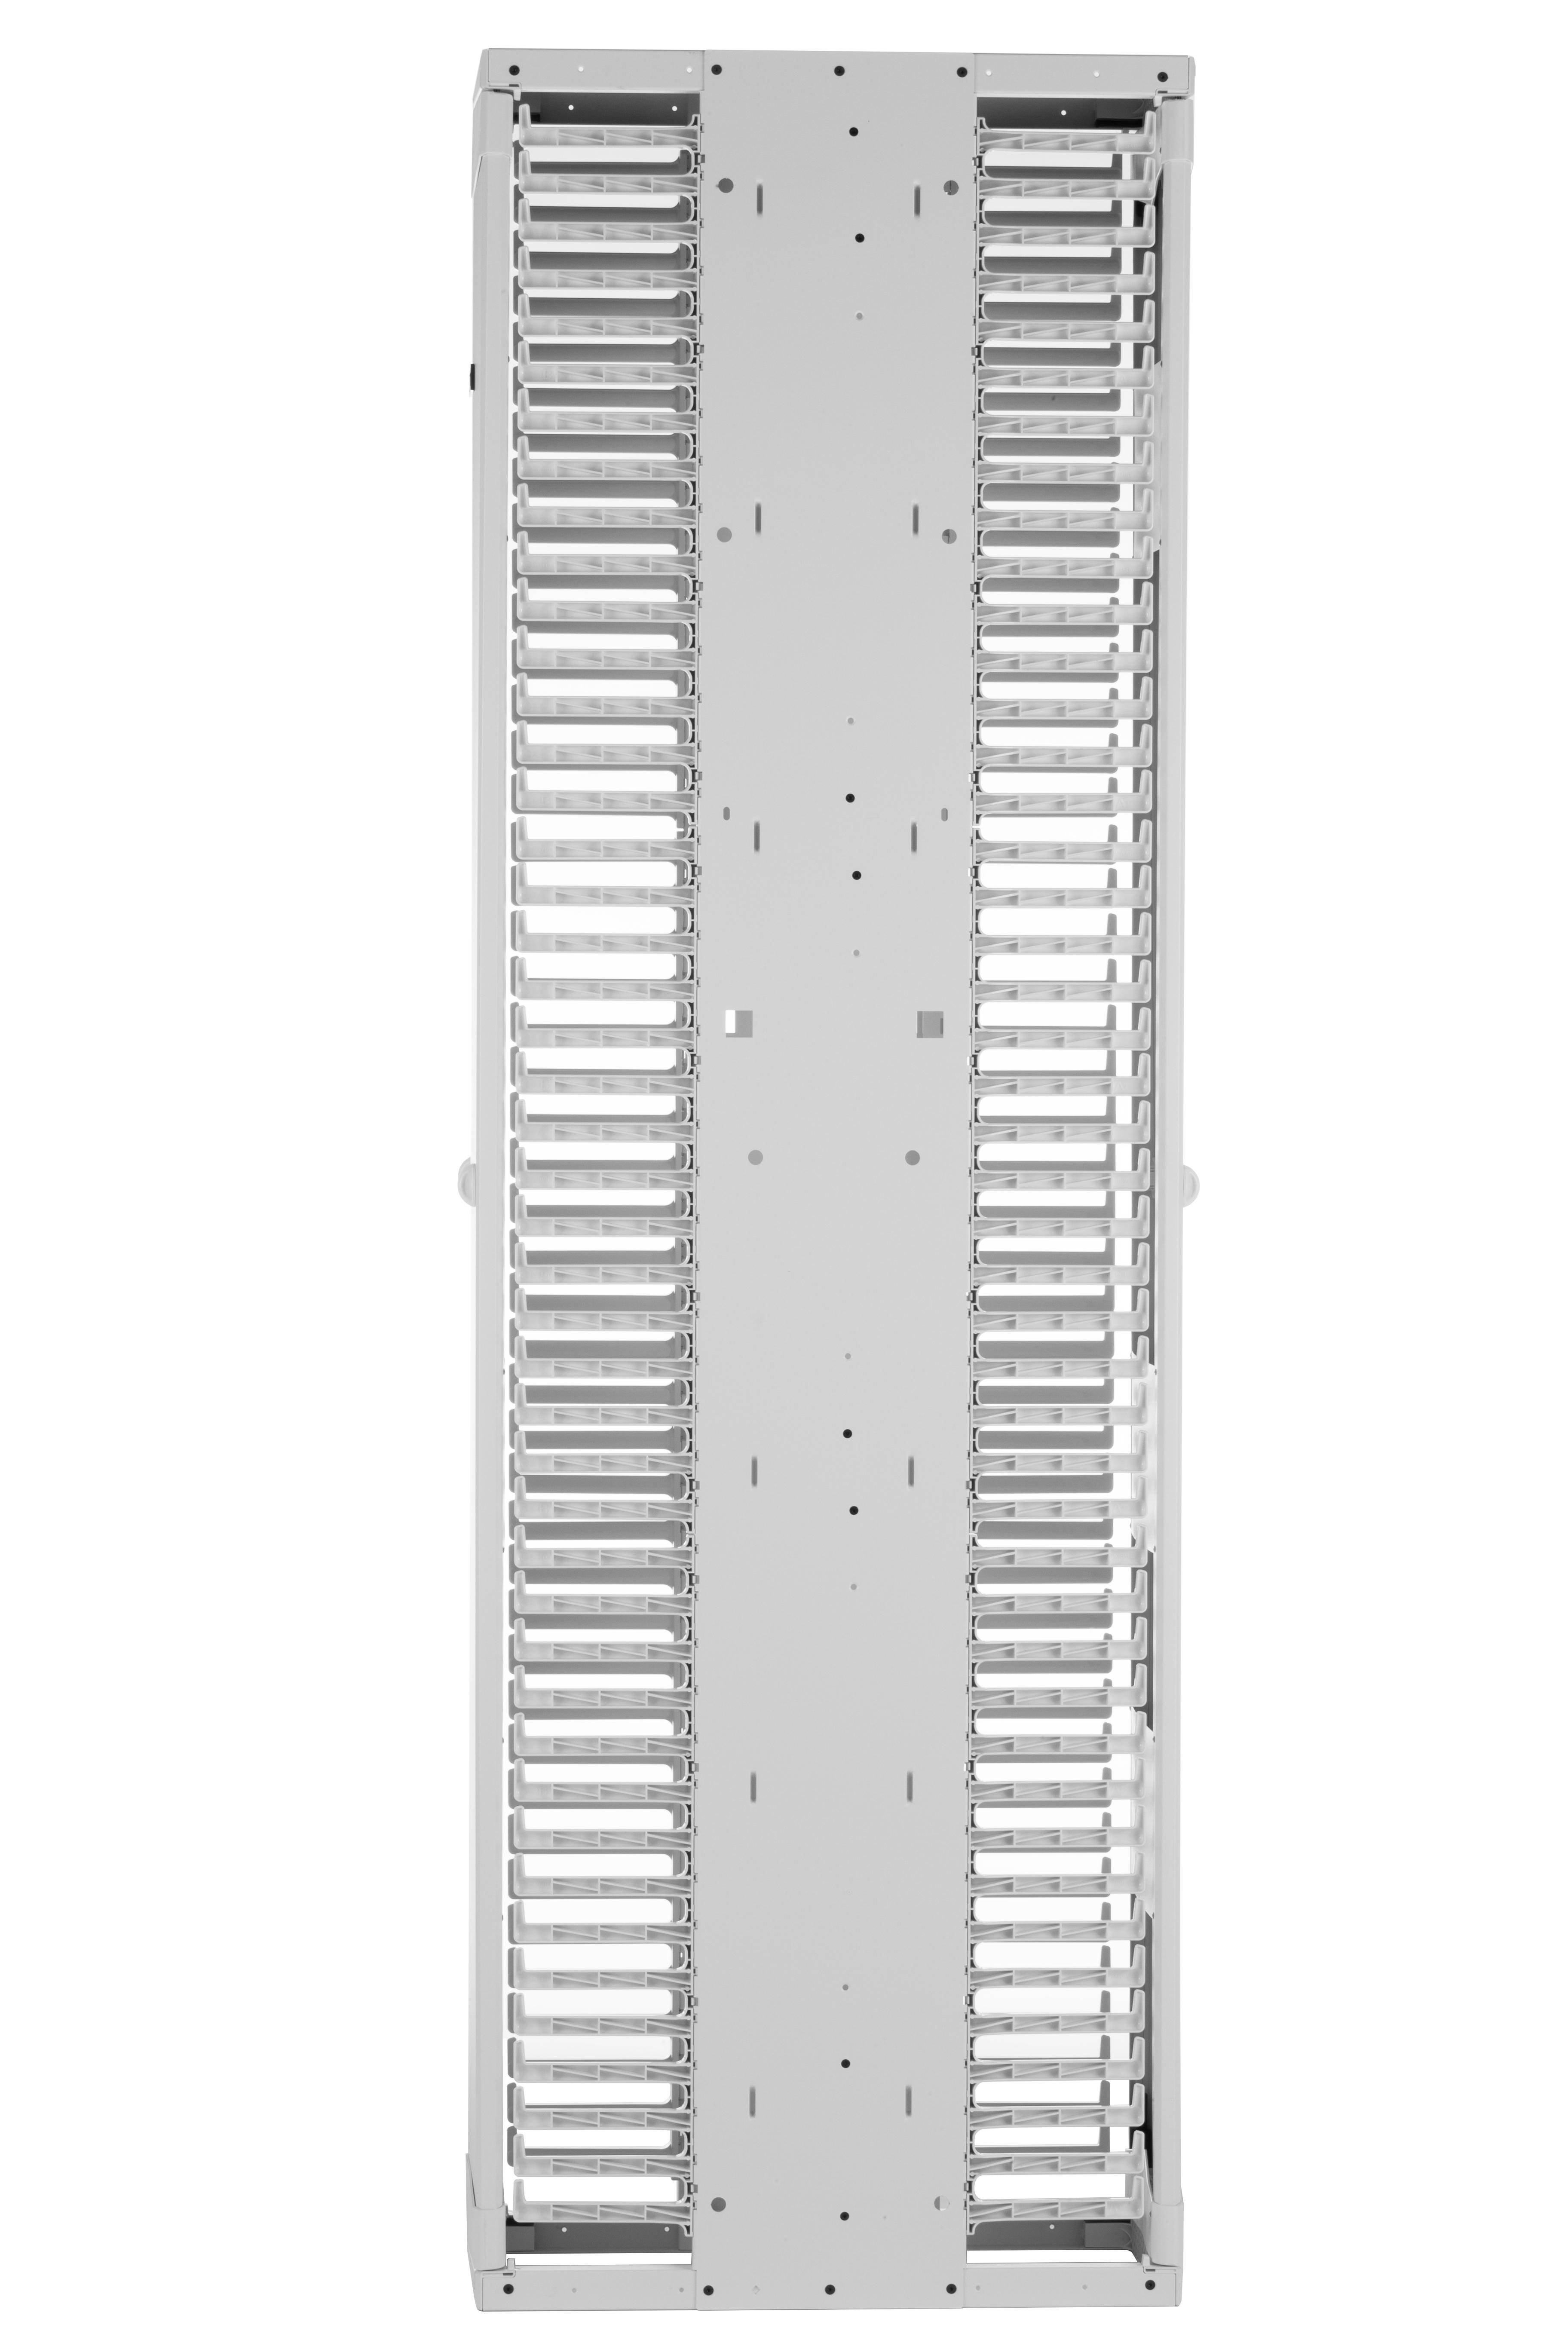 Panduit PE2VD12WH PatchRunner™2 Enhanced Dual Sided Manager